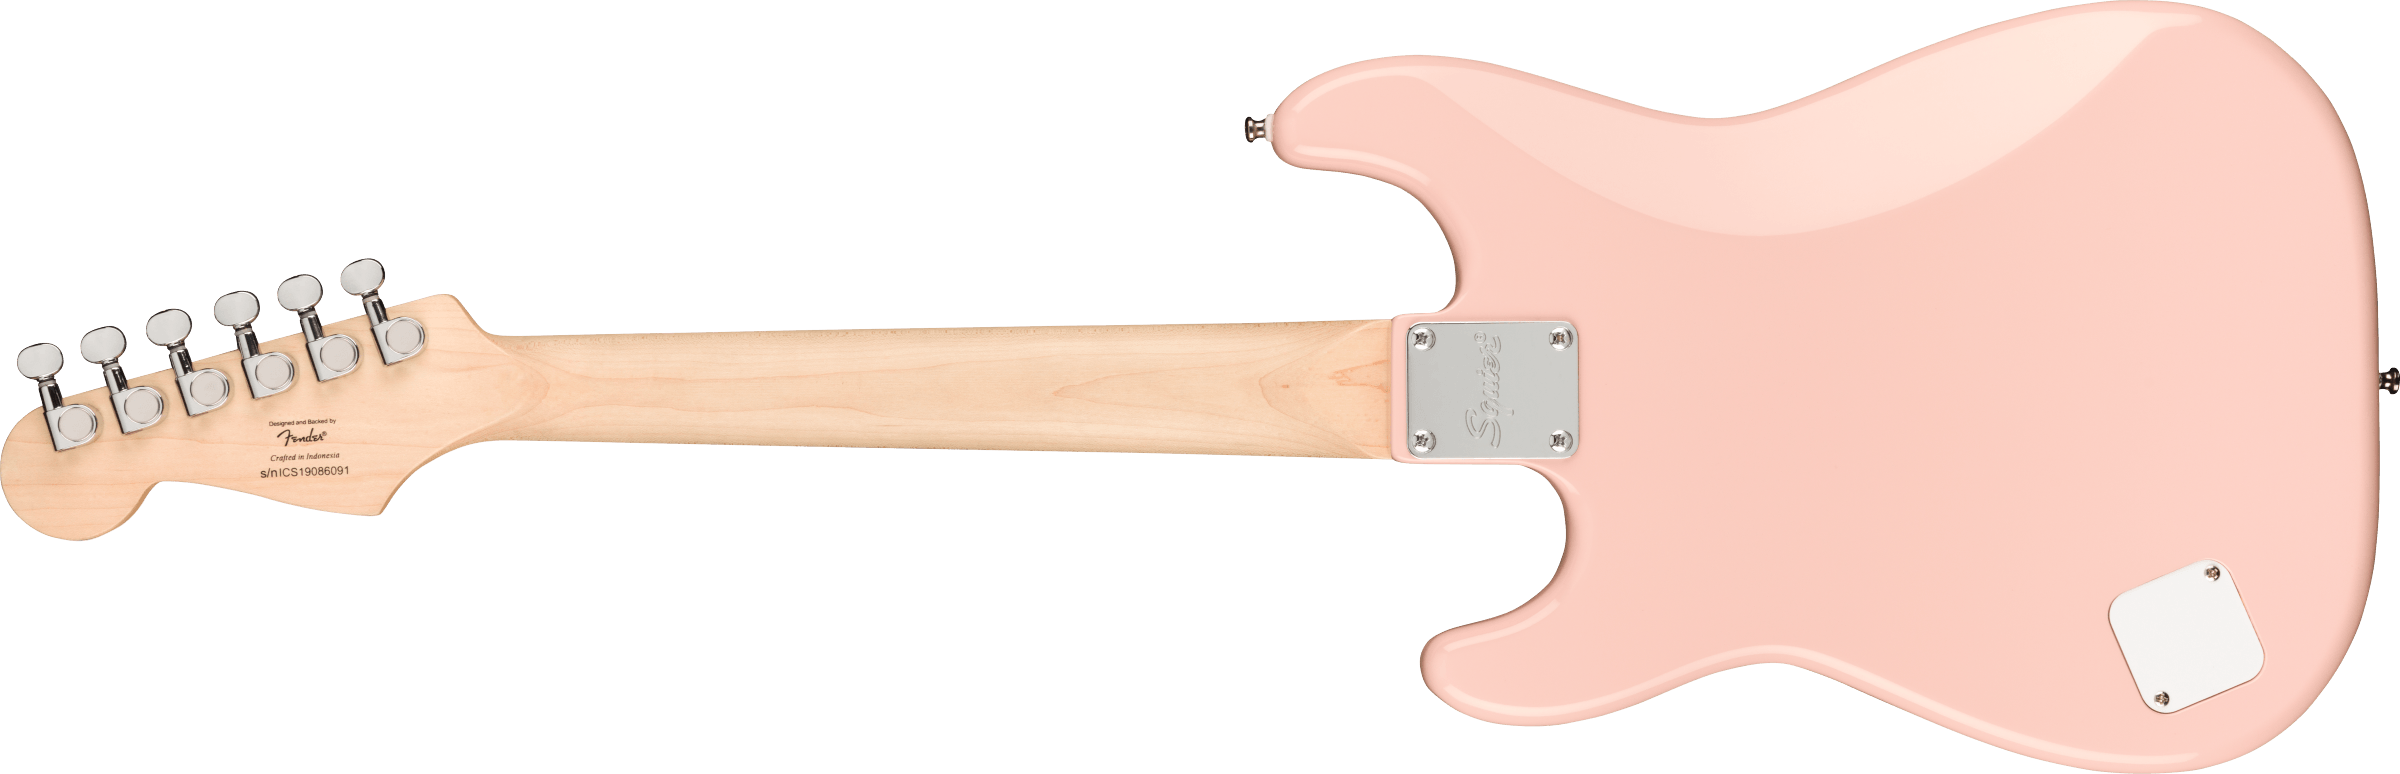 Squier Squier Mini Strat V2 Ht Sss Lau - Shell Pink - Electric guitar for kids - Variation 1